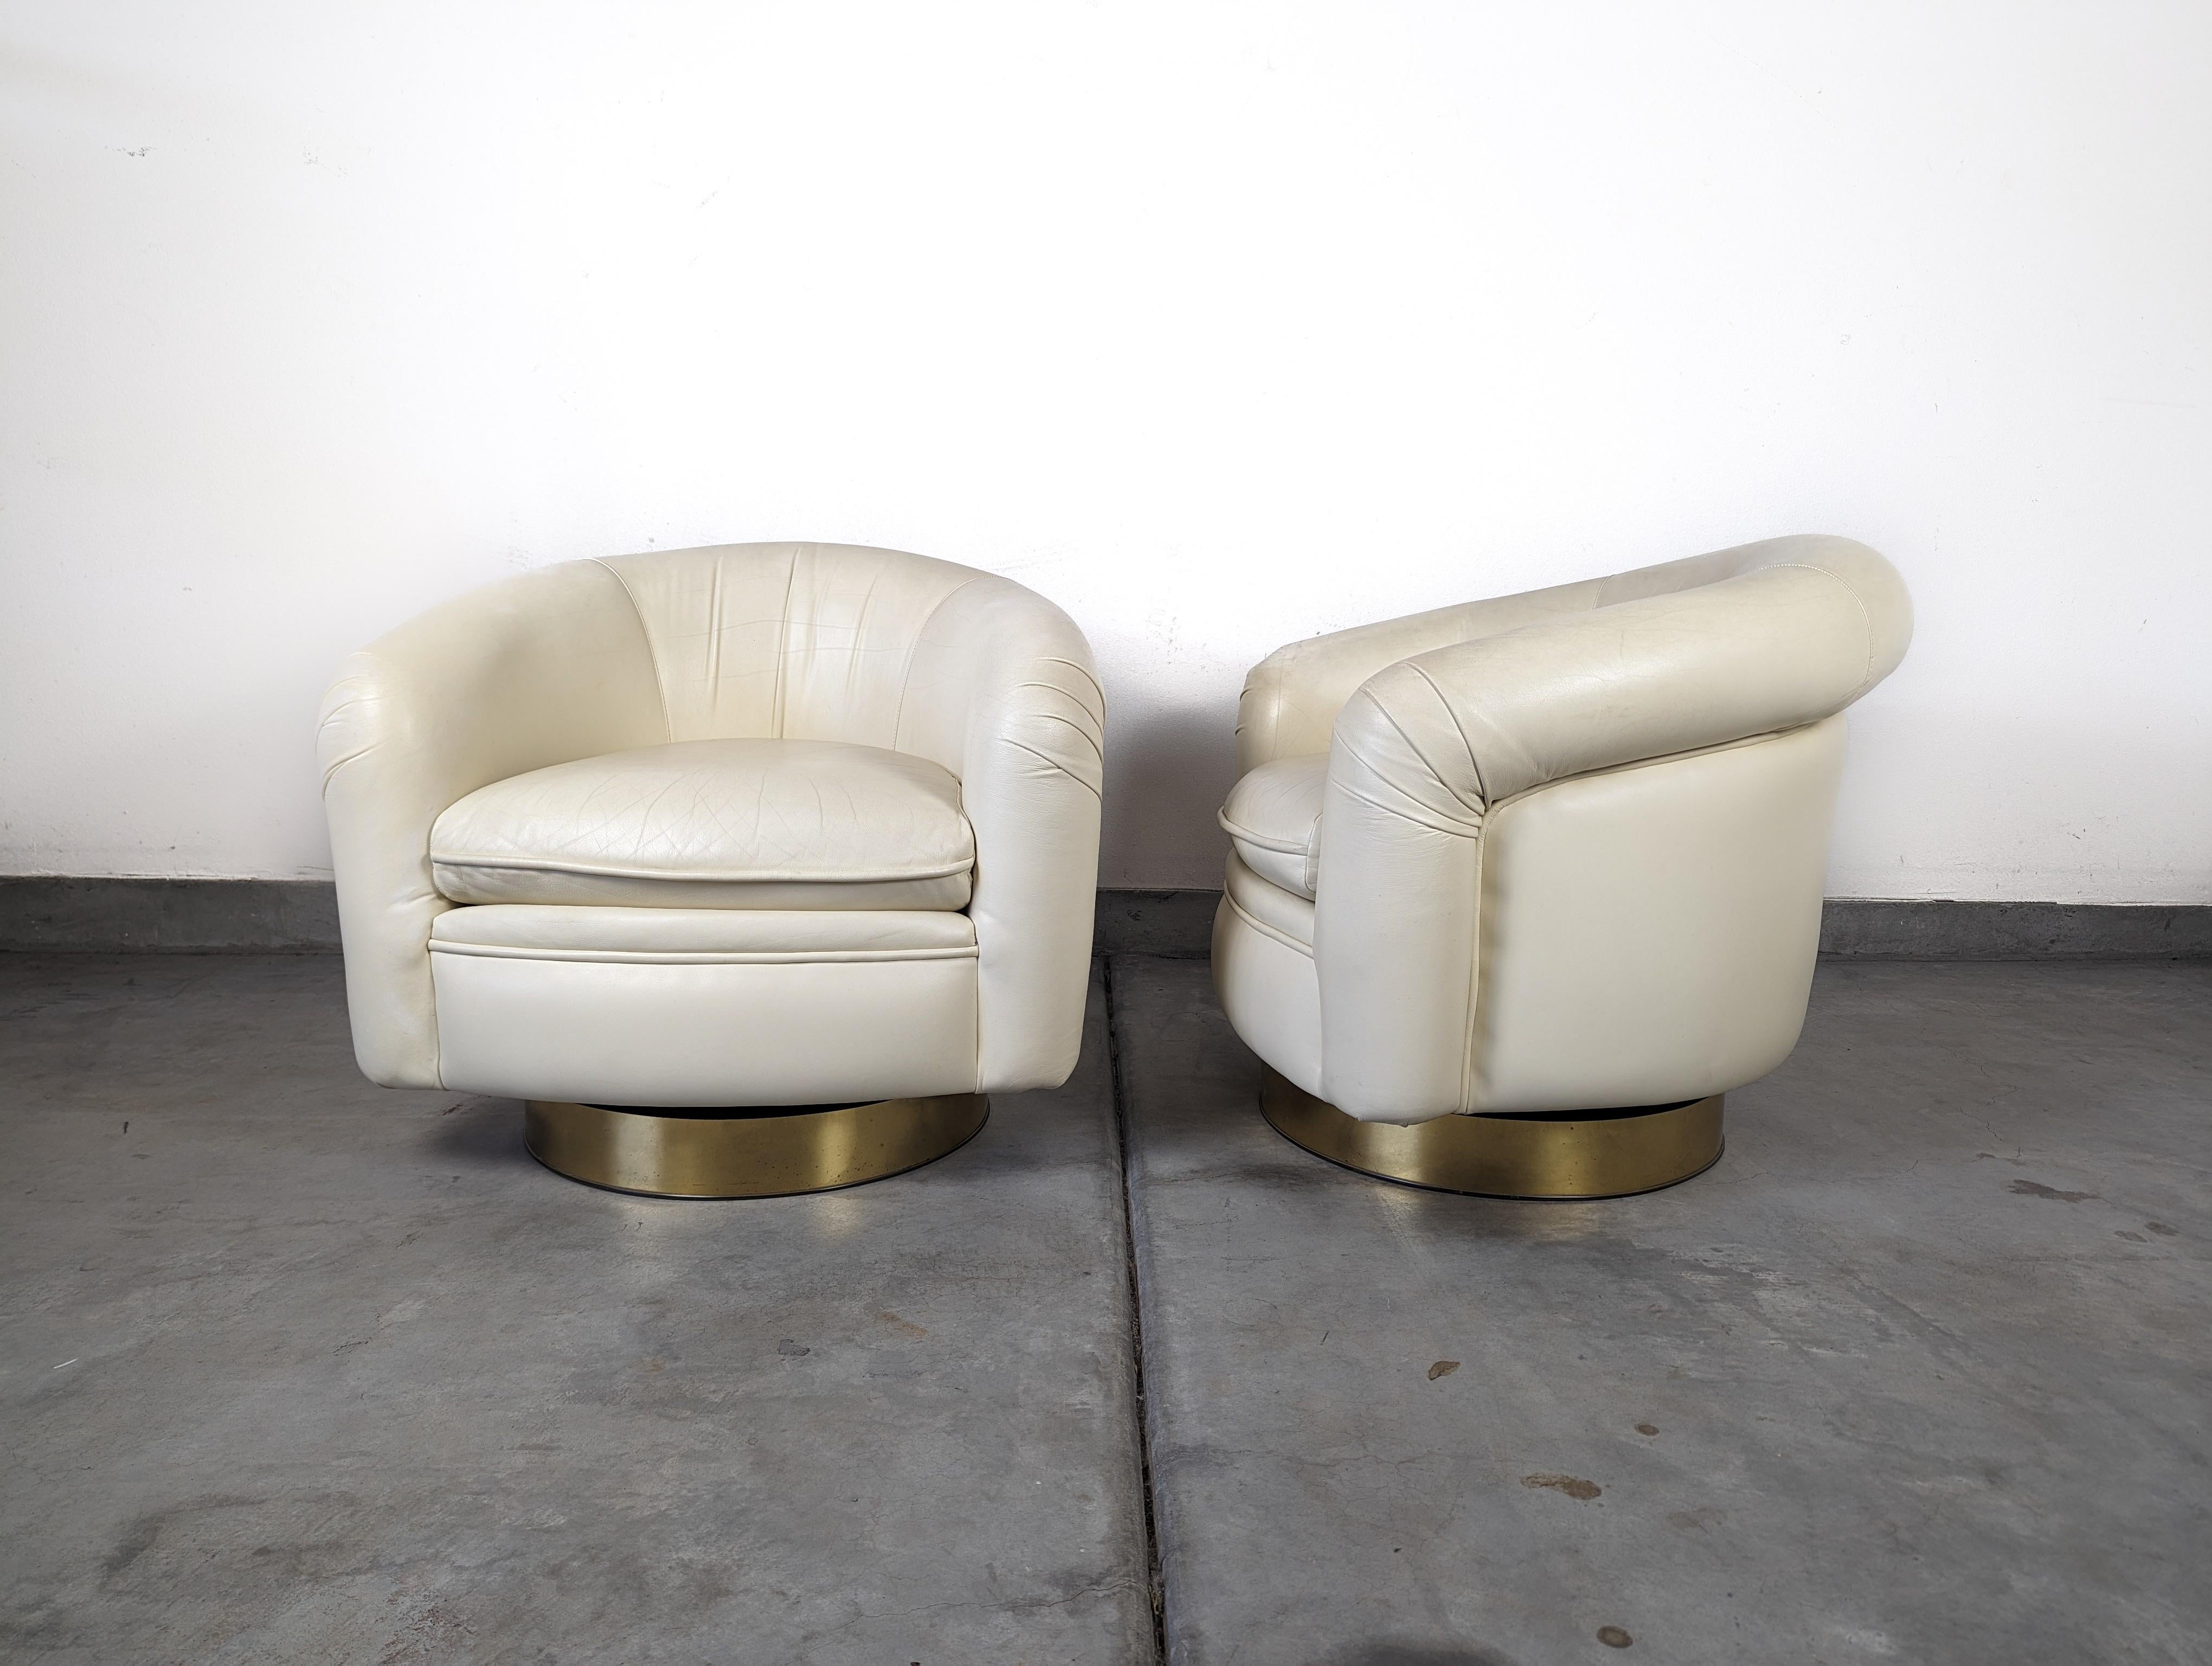 Leather Tilt Swivel Lounge Chairs by Milo Baughman for Thayer Coggin, c1970s For Sale 3